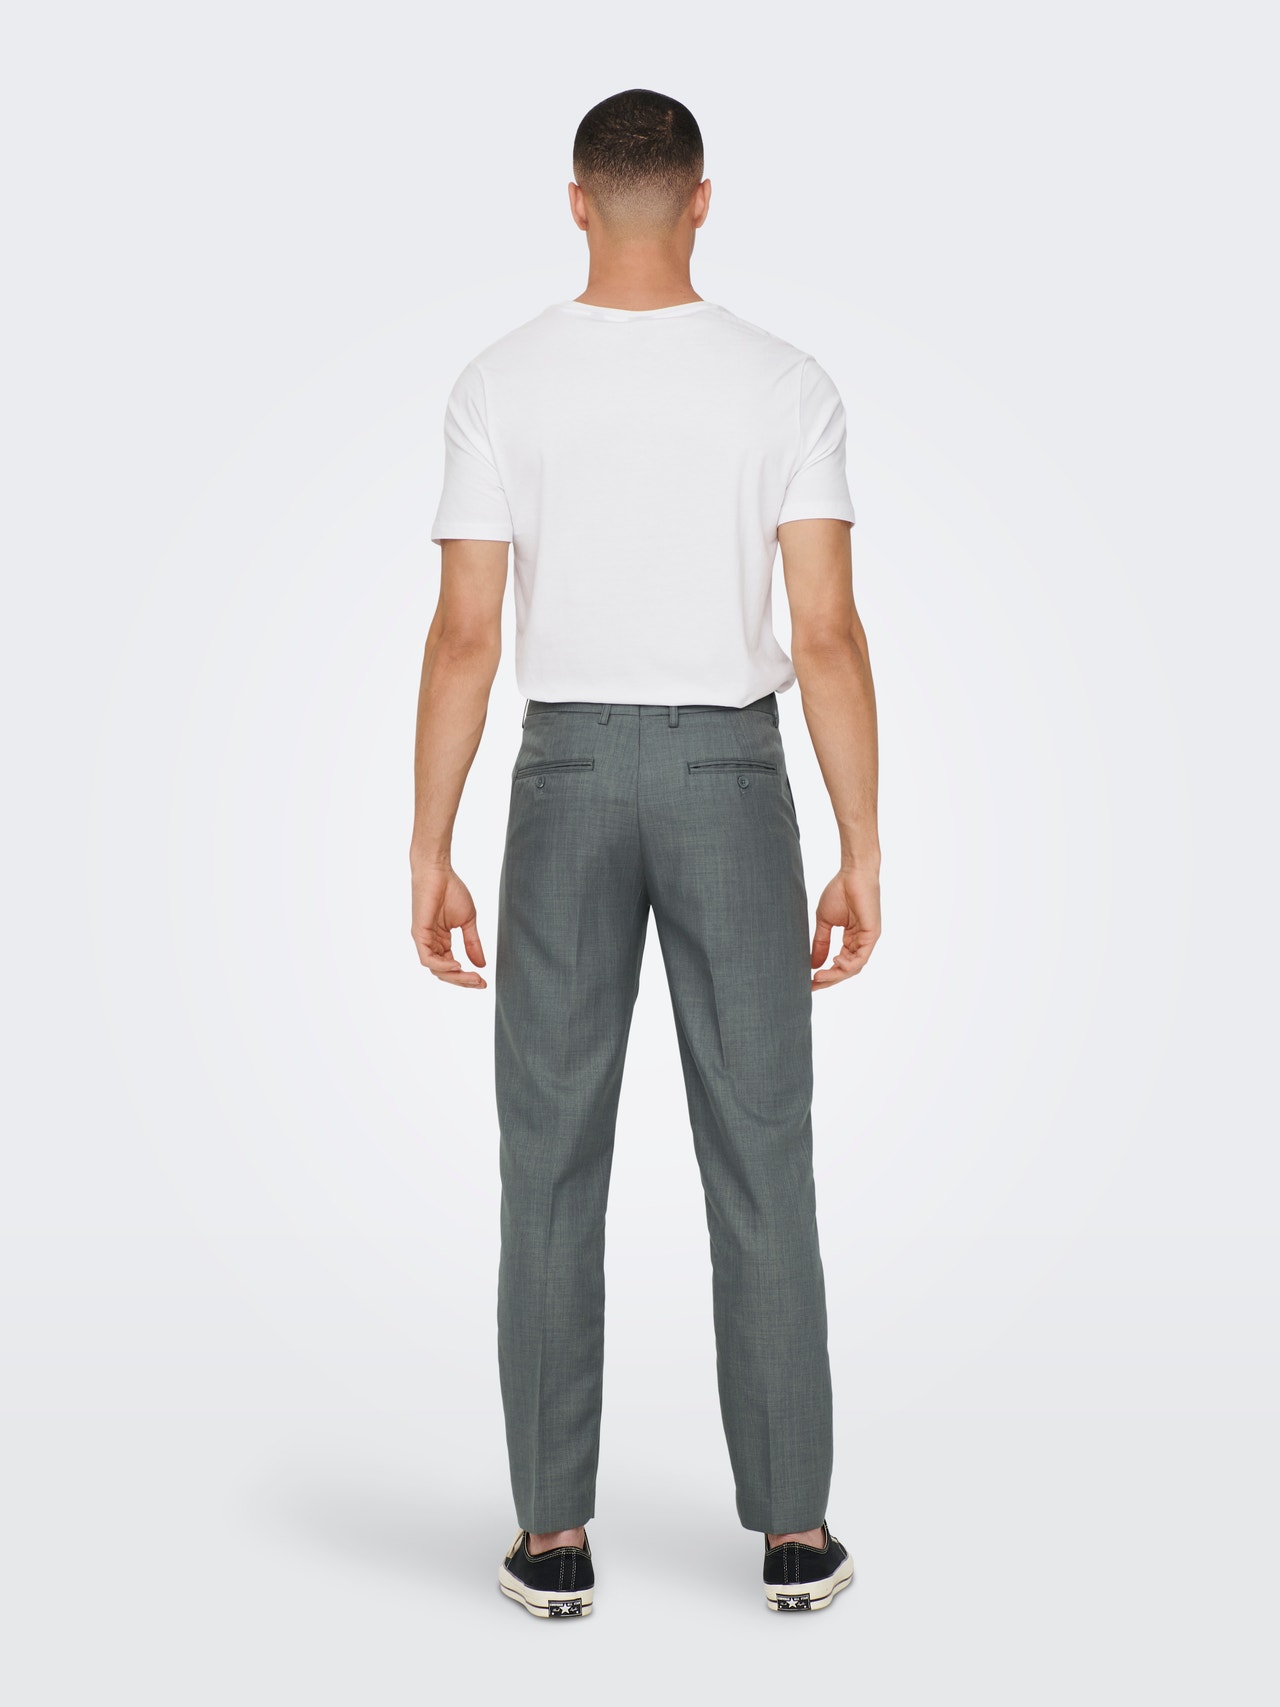 ONLY & SONS Slim Fit Tailored Trousers -Medium Grey Melange - 22026243